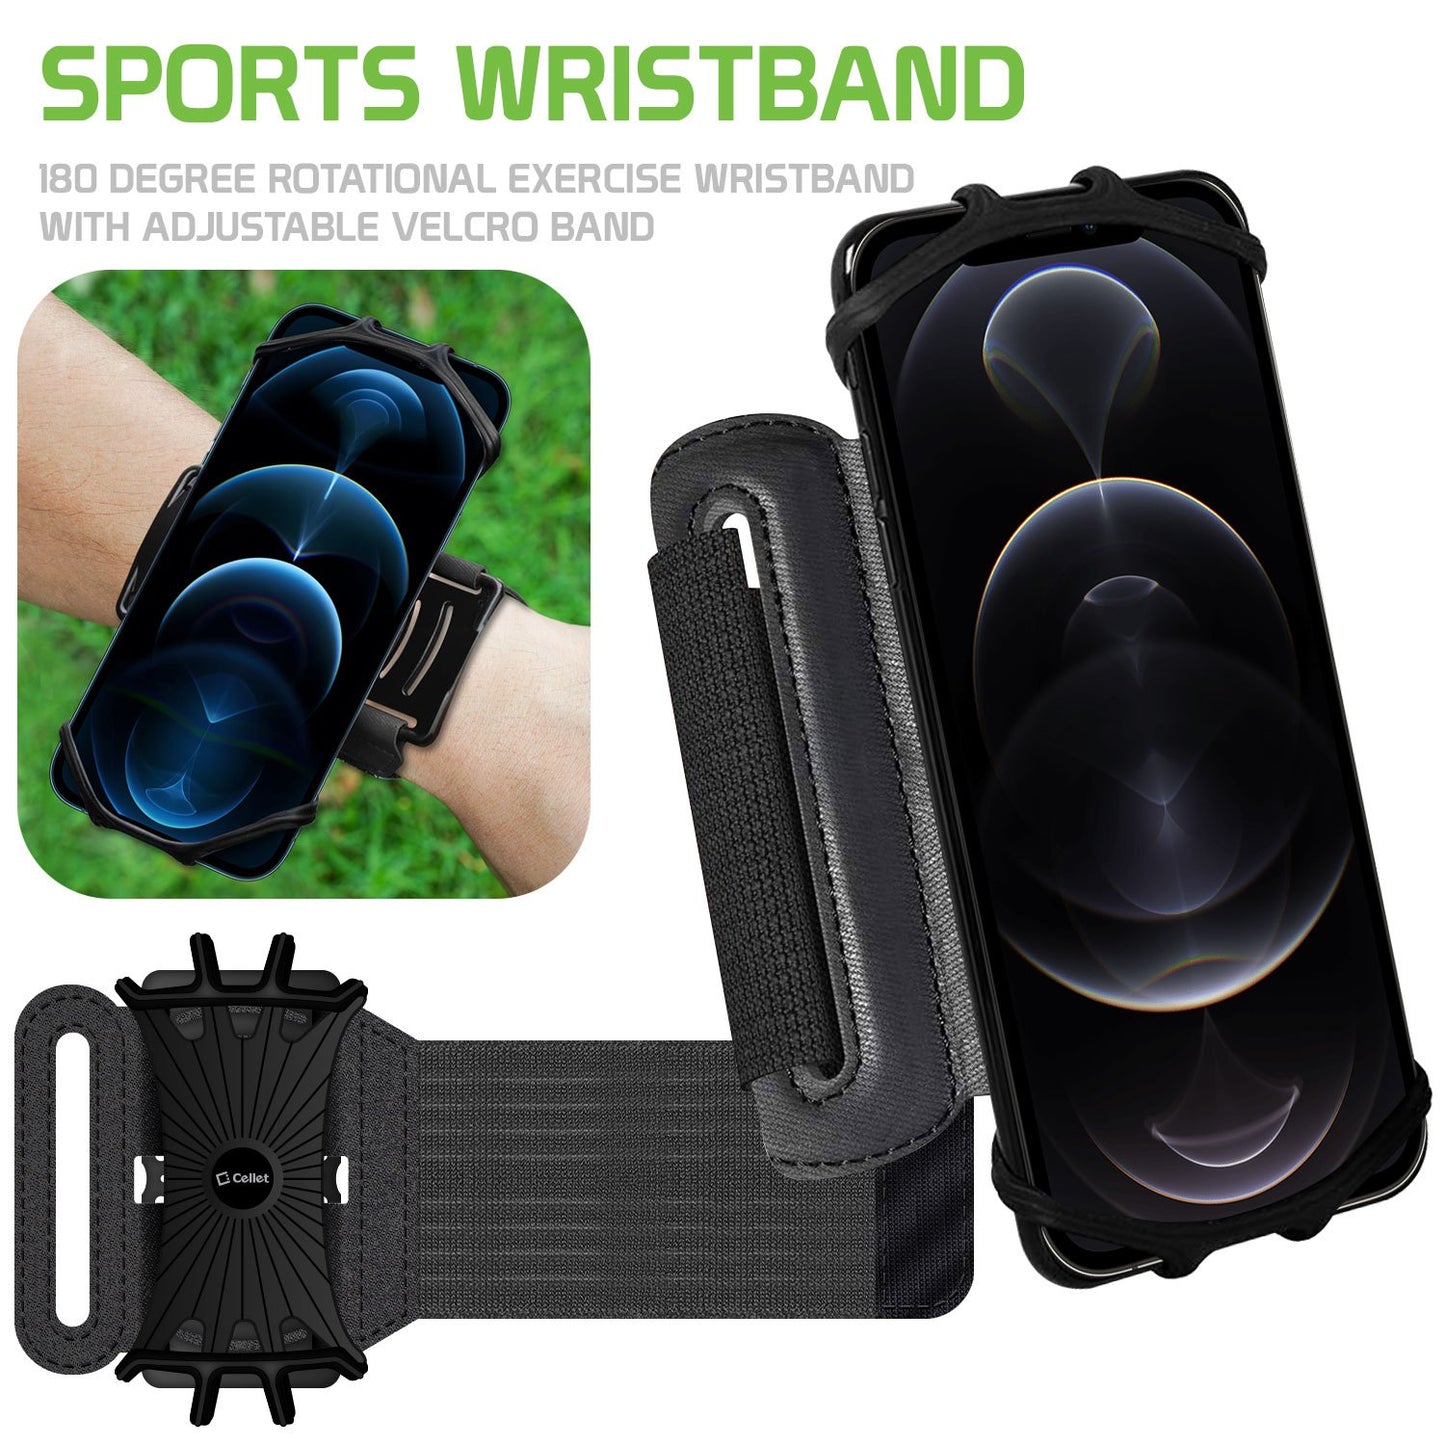 NEOARM490 - Sports Wristband Smartphone holder, 180 Degree Rotational, ,Adjustable Velcro Band, Fits 4 to 6 inch Phones - Black